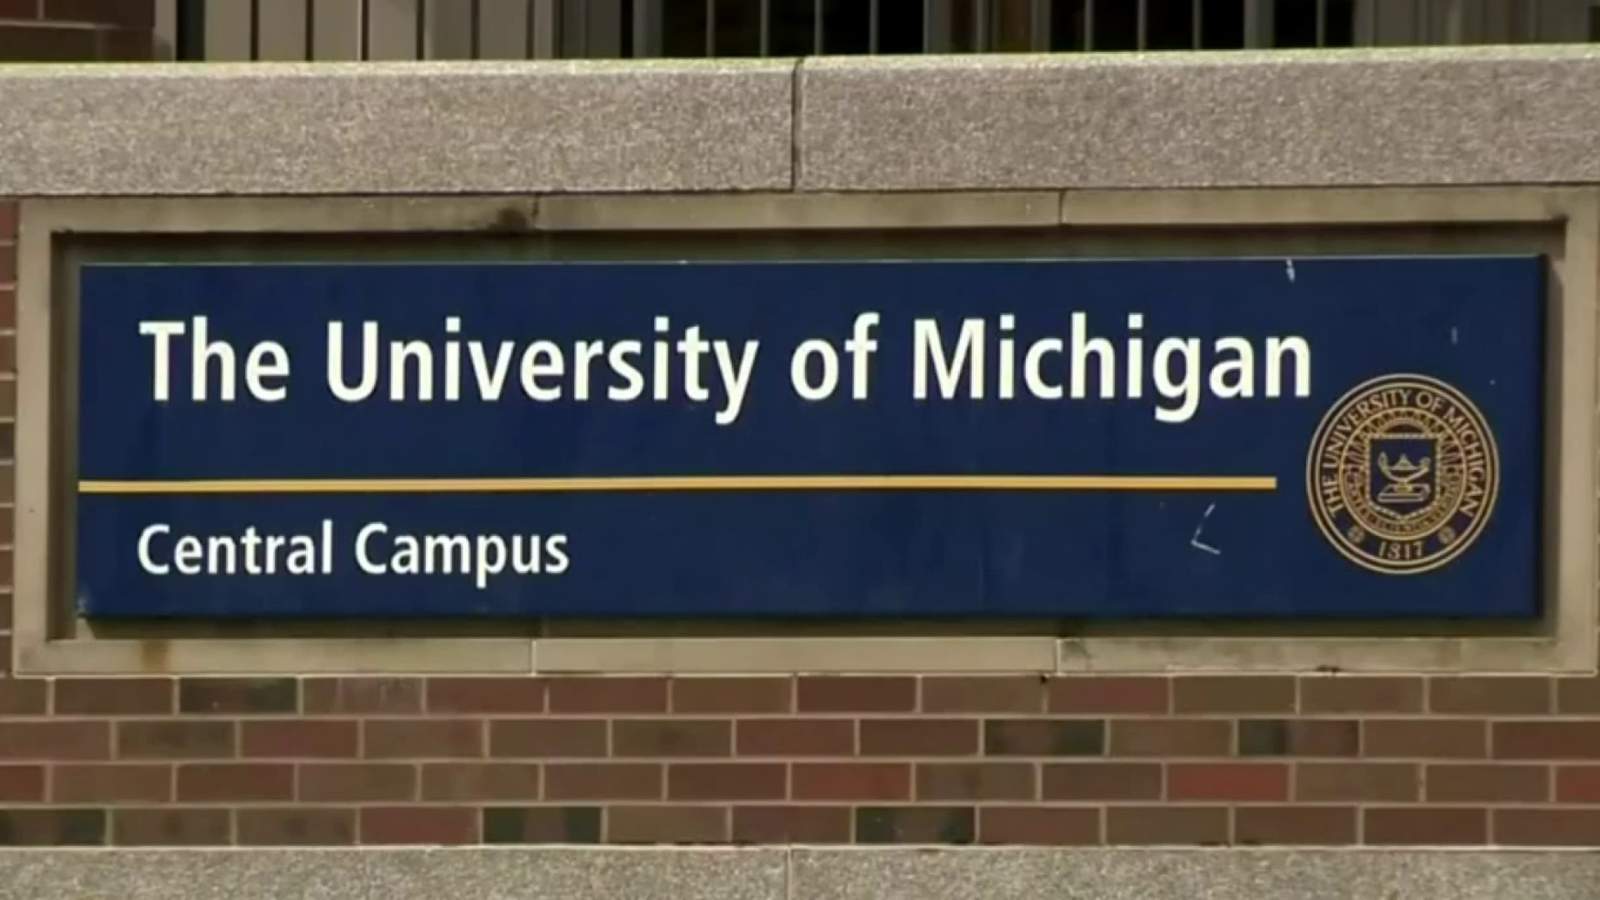 University of Michigan will no longer host 2020 presidential debate due to COVID-19 concerns